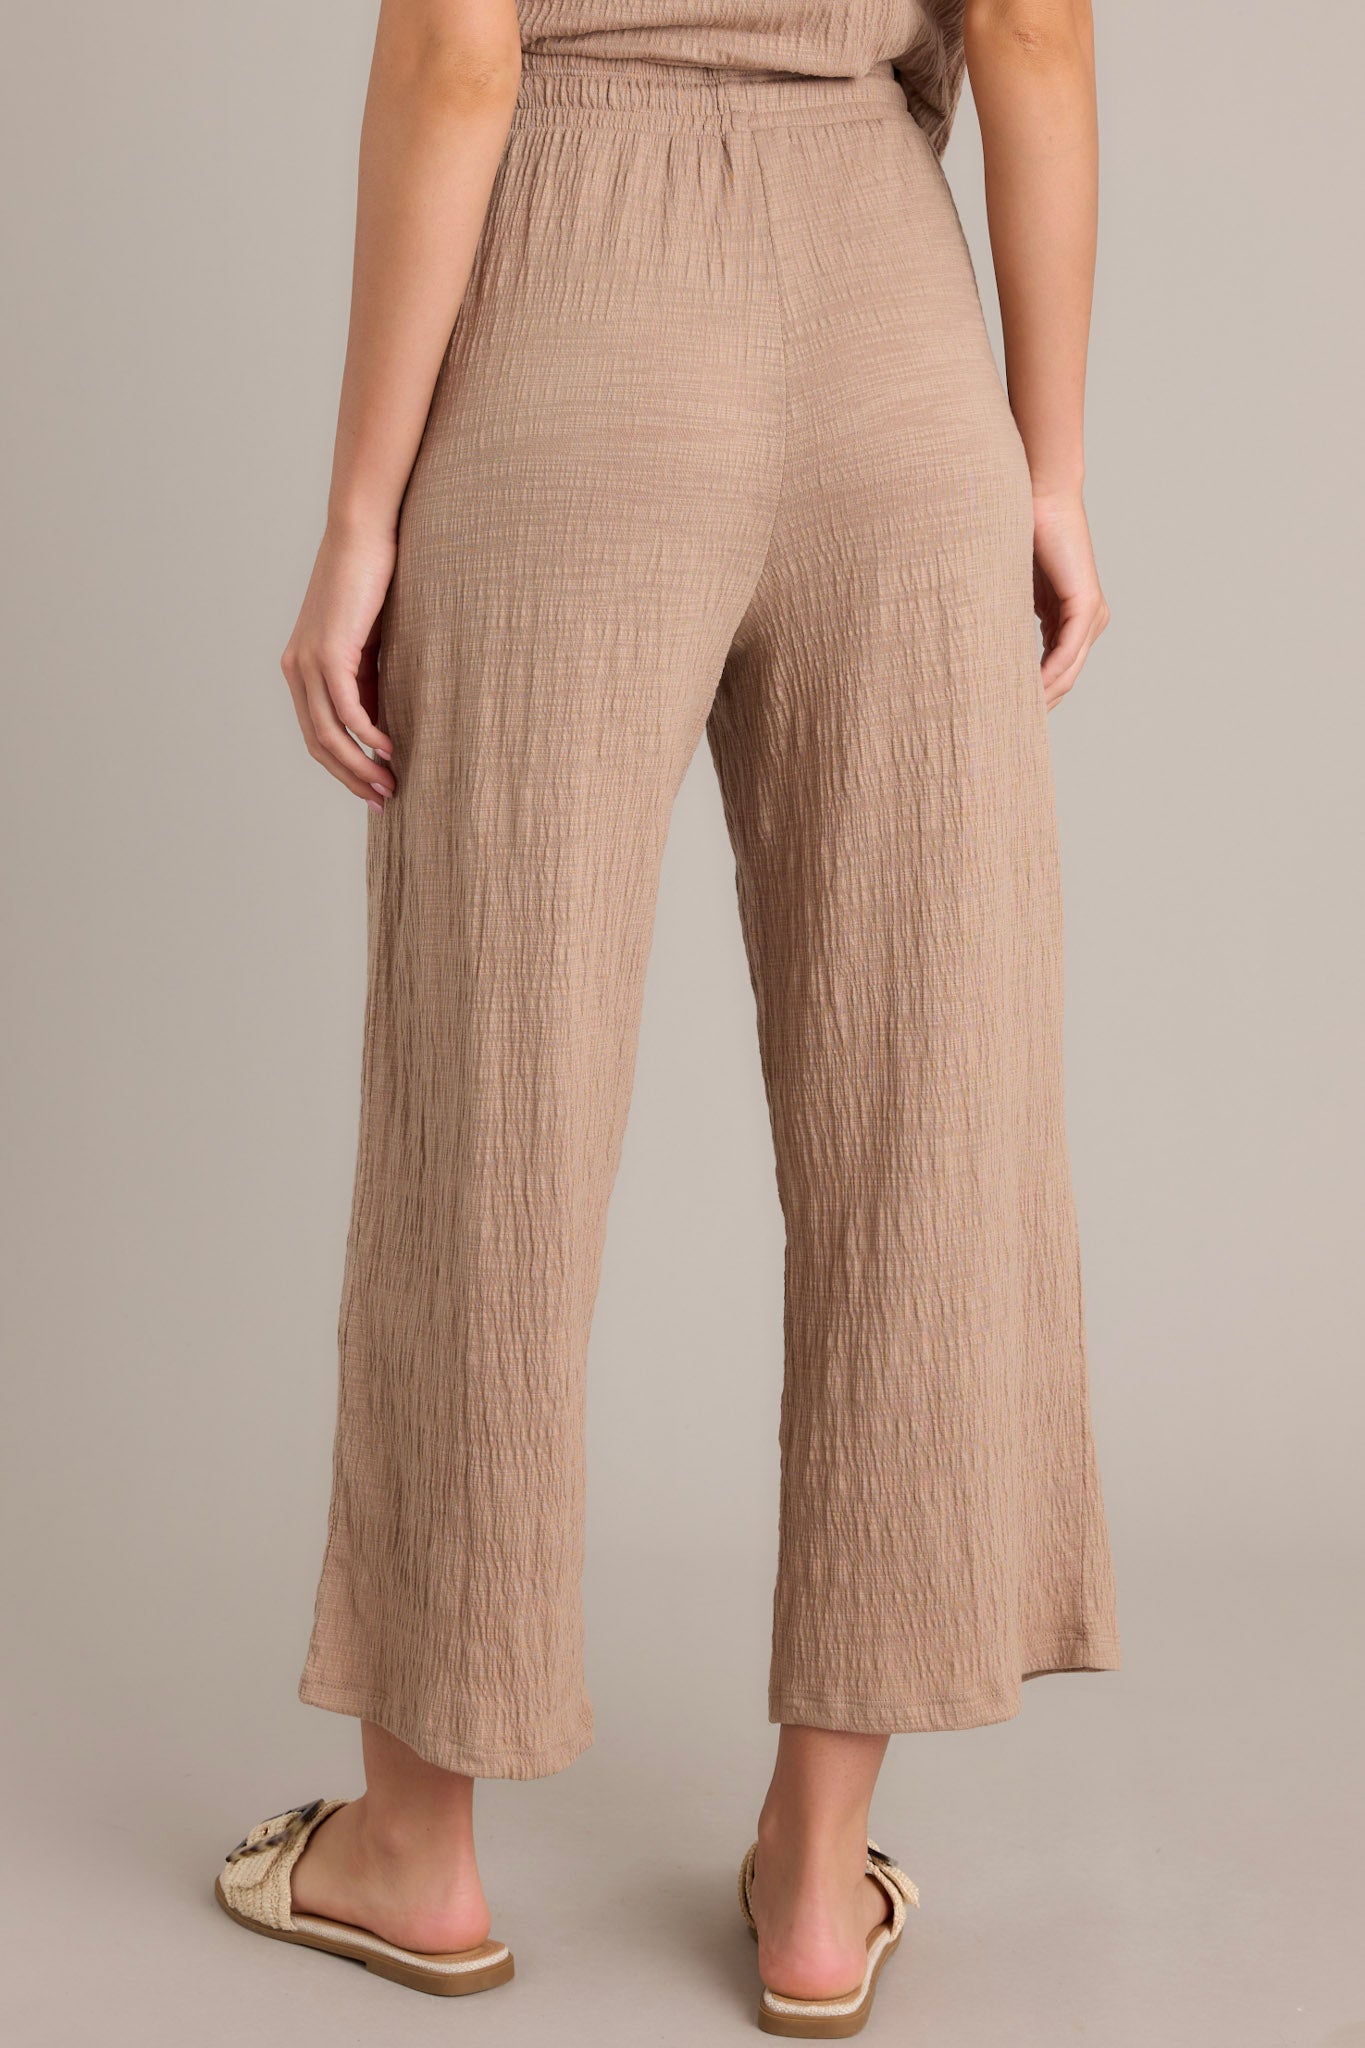 Back view of beige pants showcasing the high-waisted design, elastic waistband, textured material, and wide leg cut.